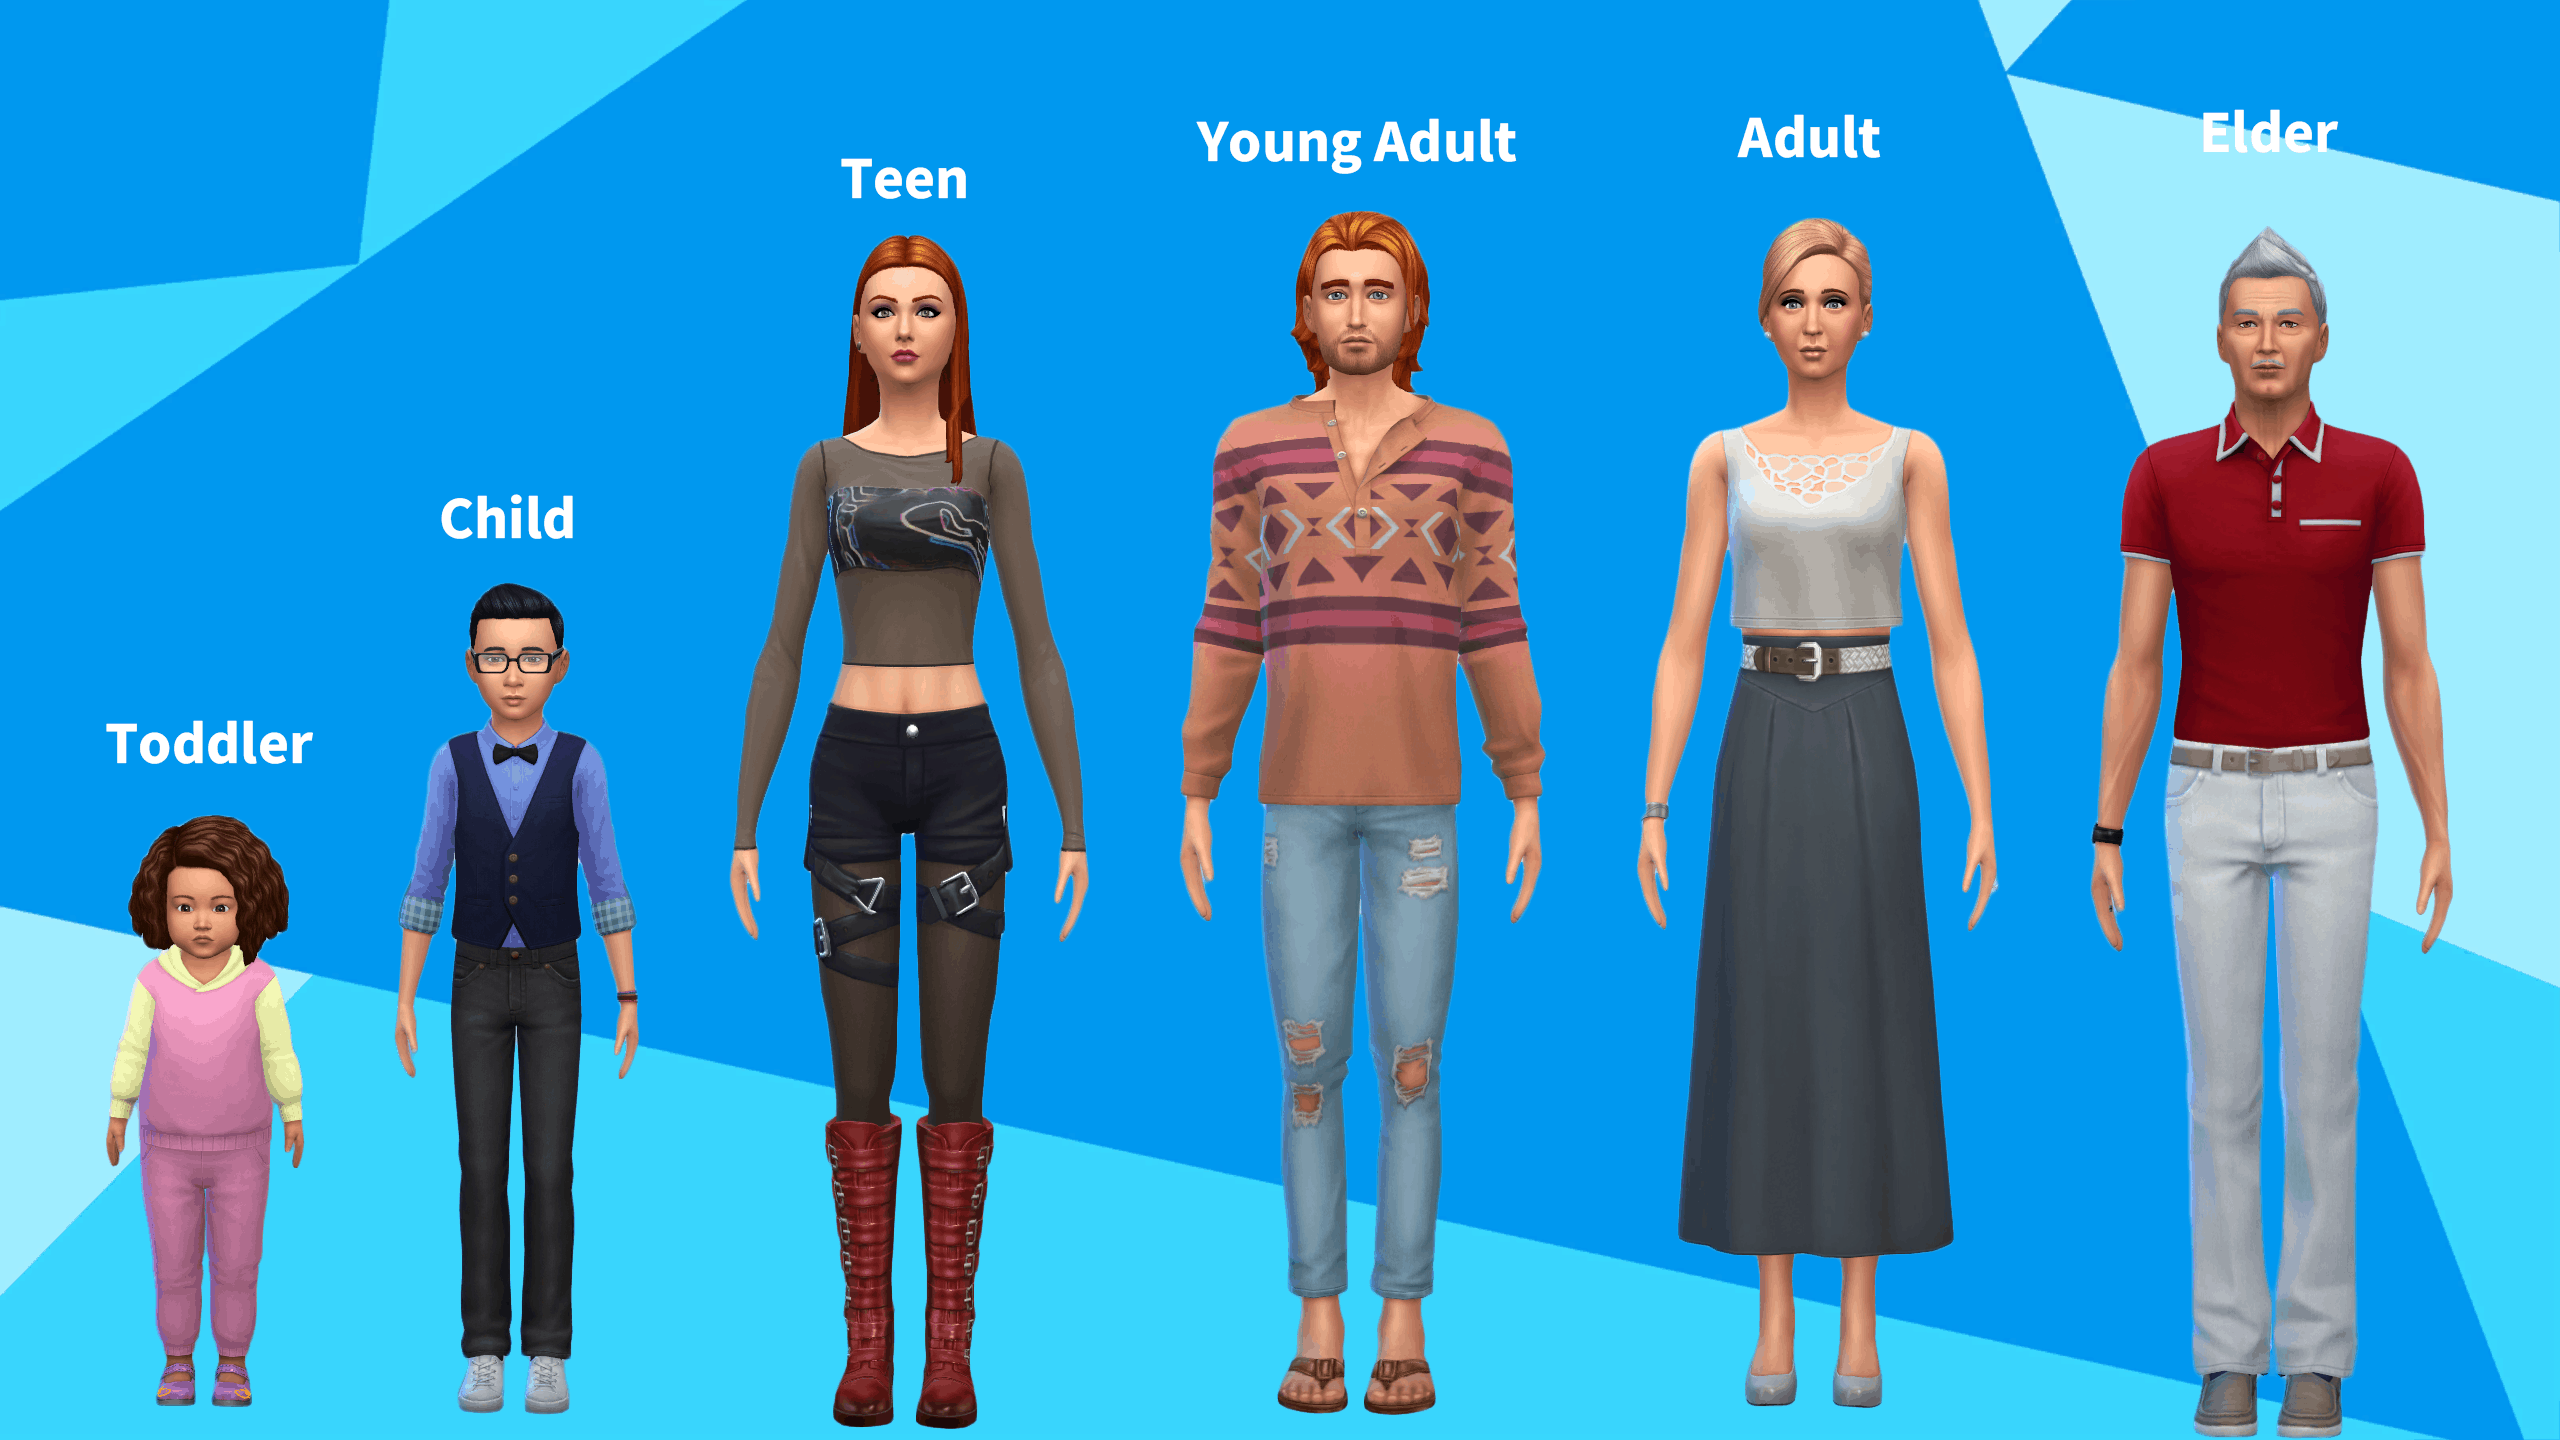 toplessness mod sims 4